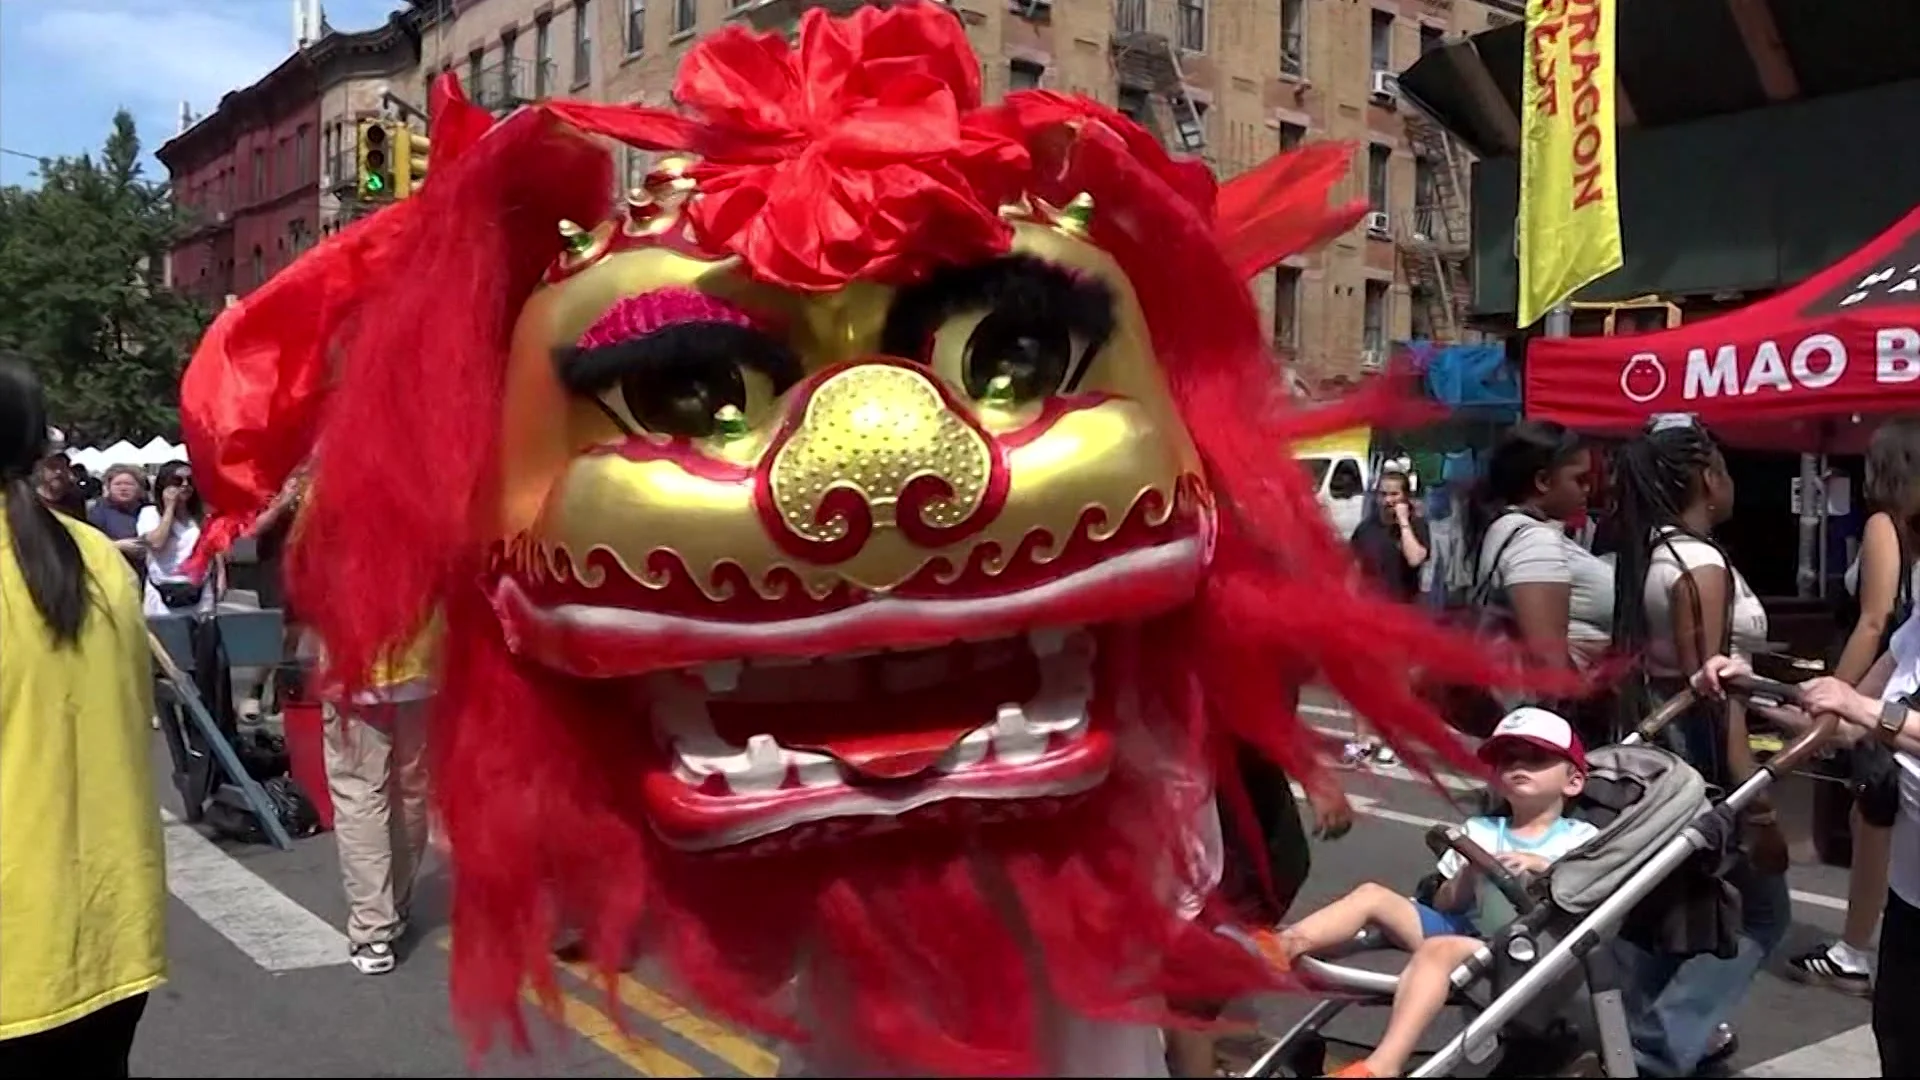 Dragon Fest in Park Slope a celebration of Chinese culture and cuisine